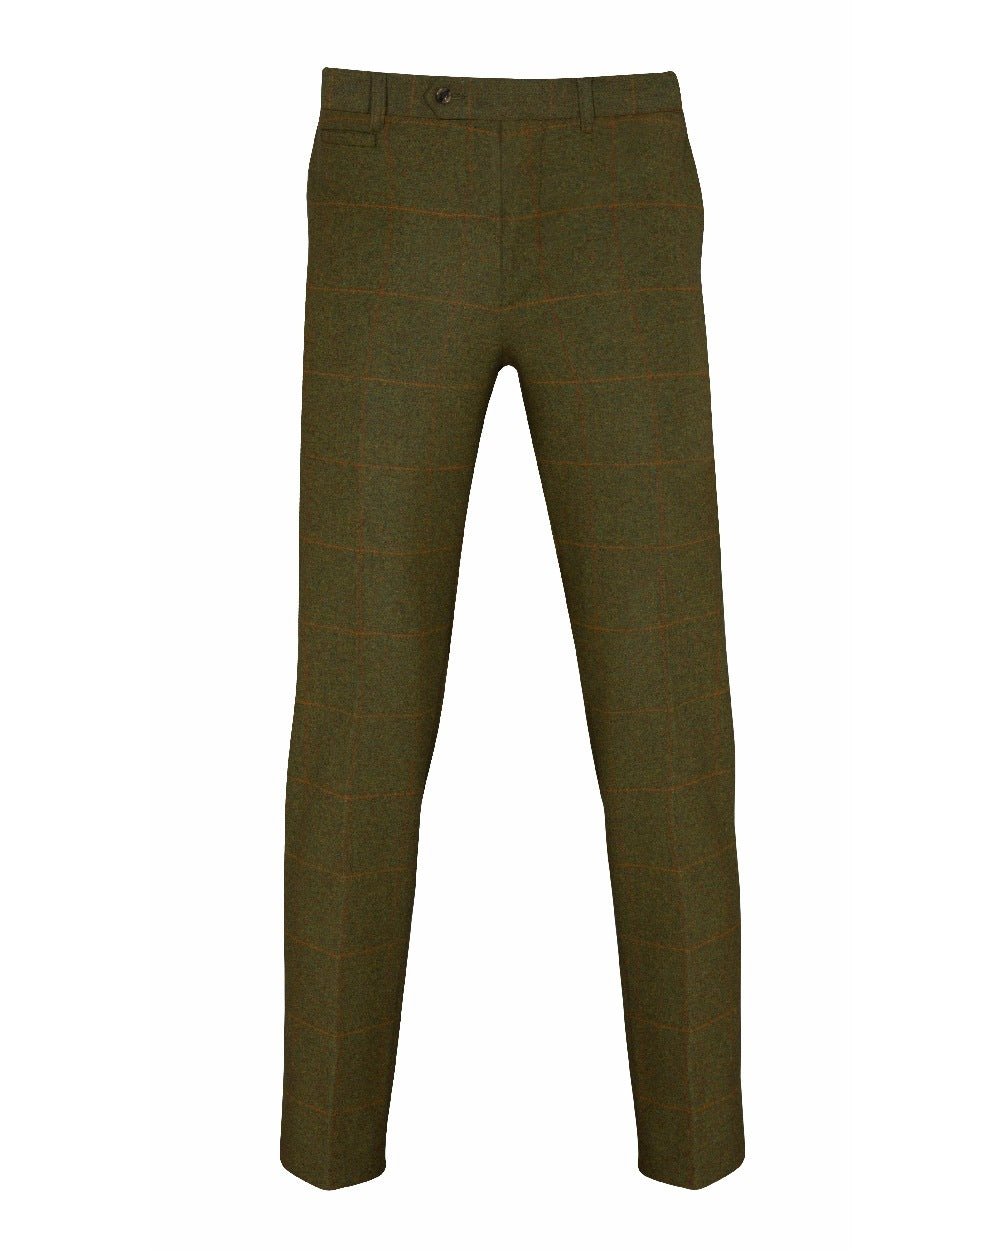 Alan Paine Combrook Mens Trousers in Maple 